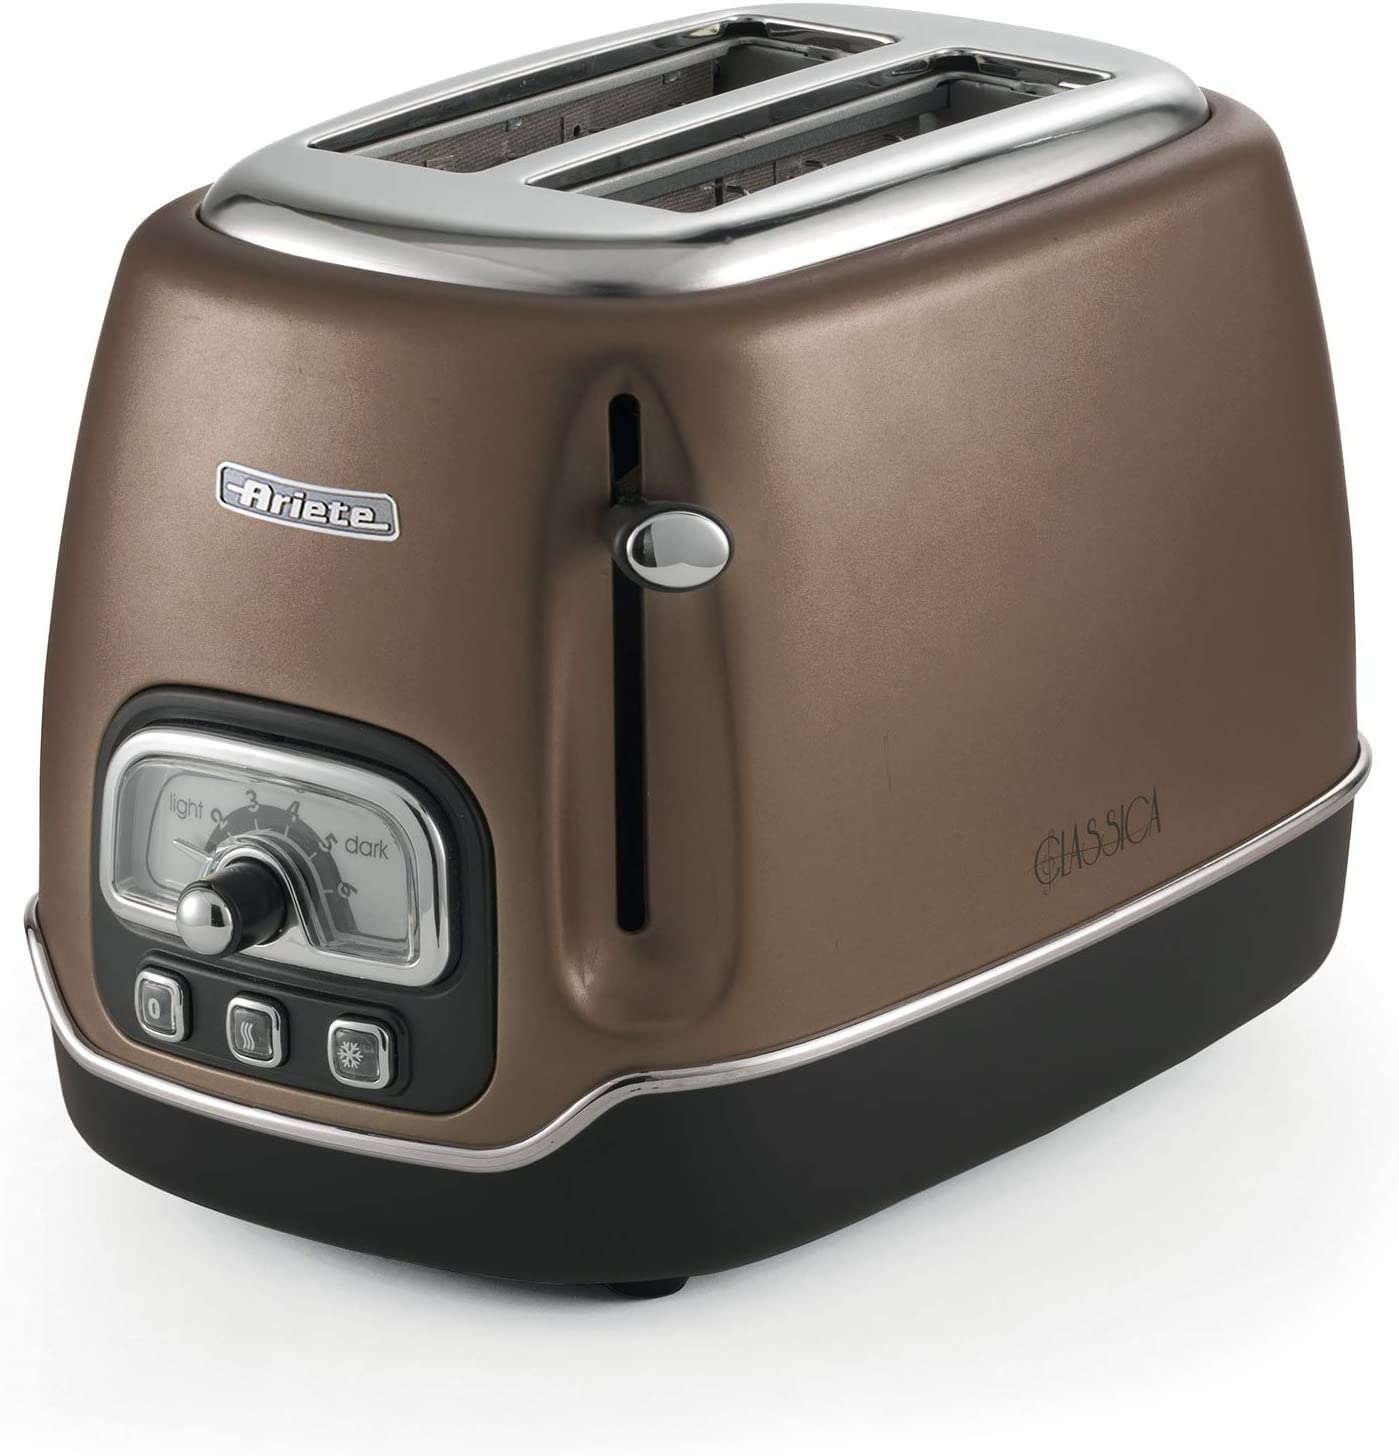 Bialetti 158BR Toaster-158BR Toaster, 815, Painted Stainless Steel, Bronze